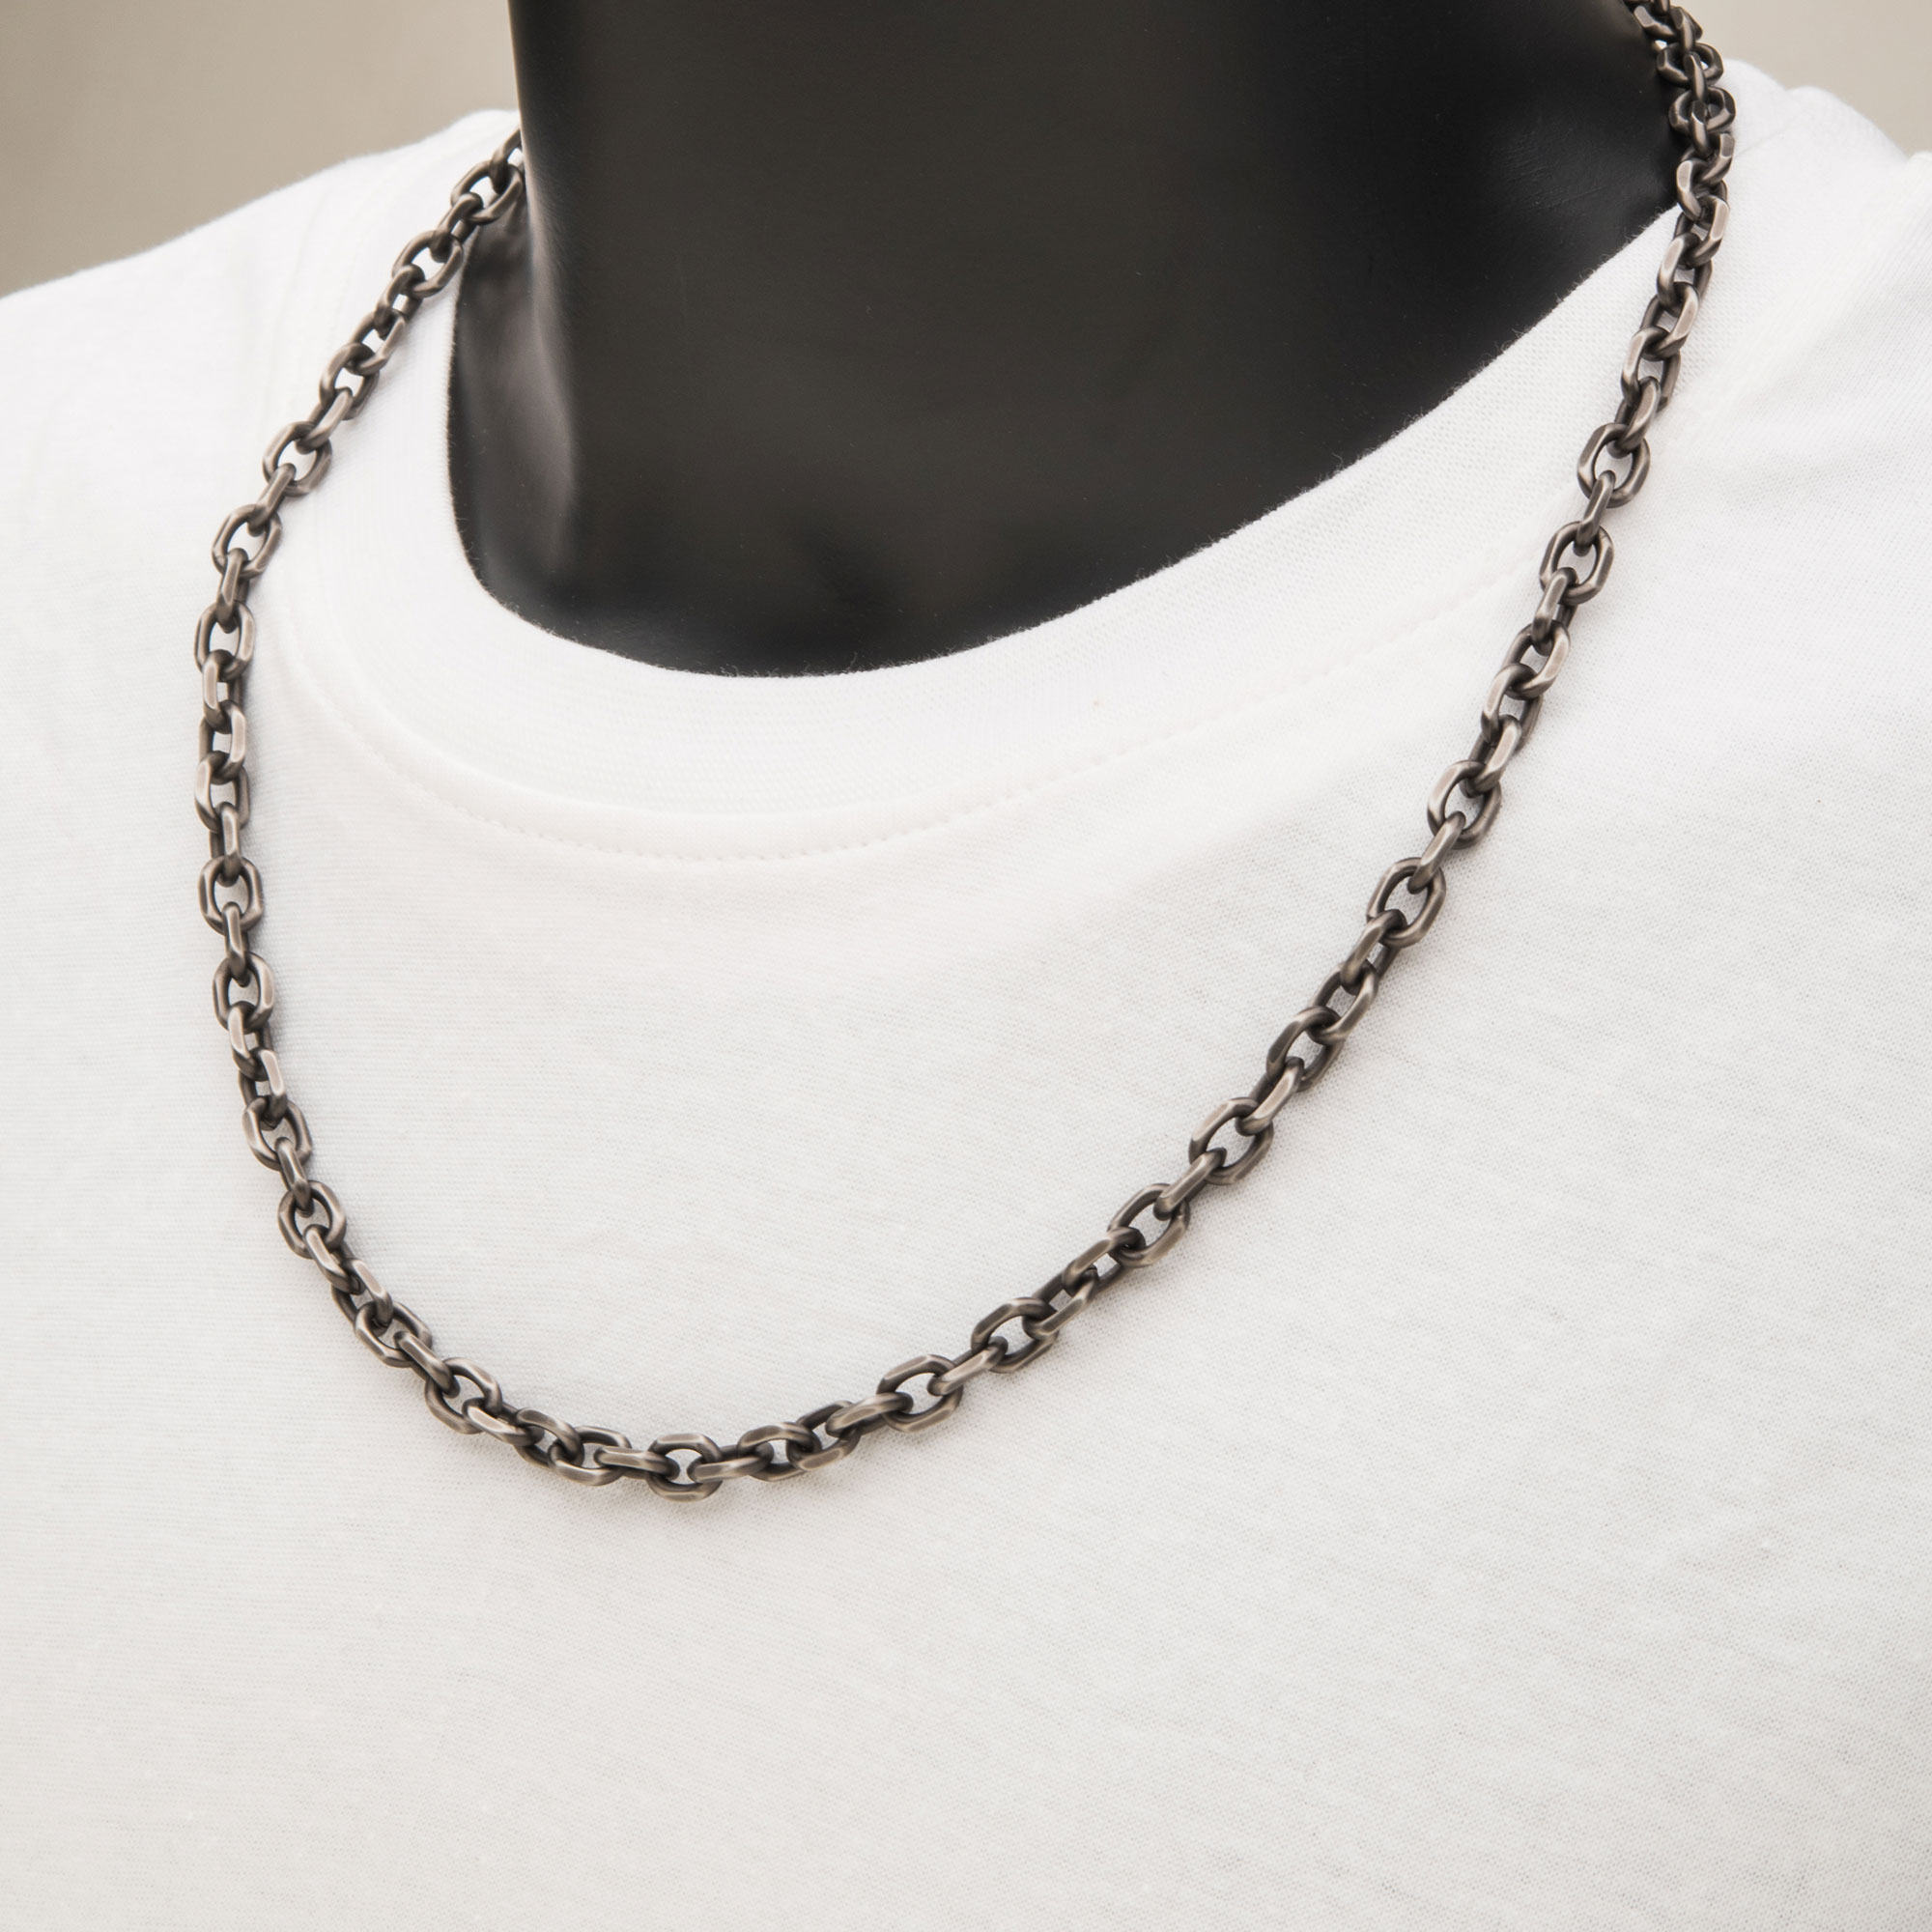 7mm Oxidized Steel Knife Edge Link Chain Image 3 Enchanted Jewelry Plainfield, CT